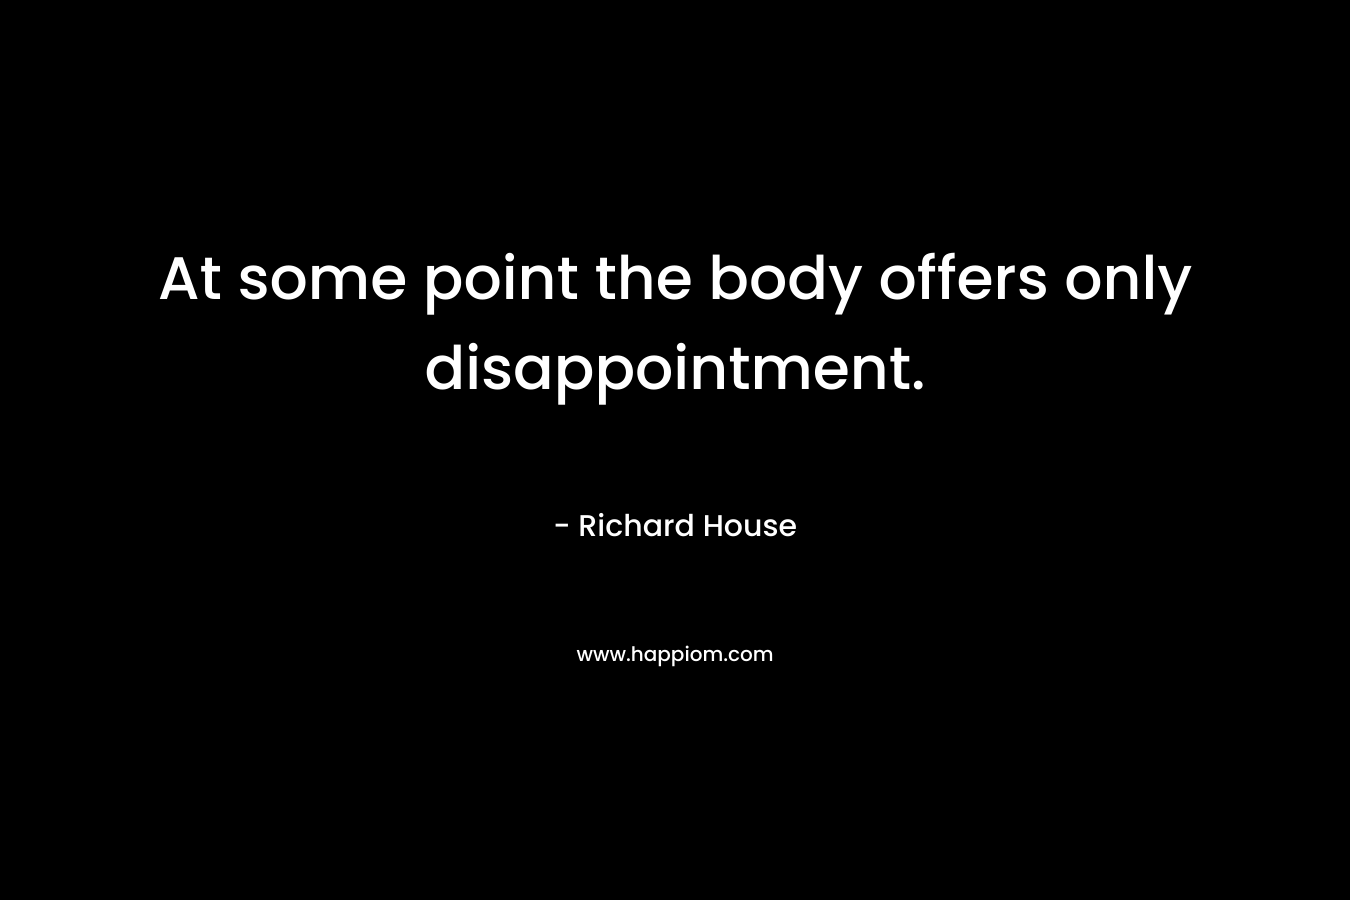 At some point the body offers only disappointment.